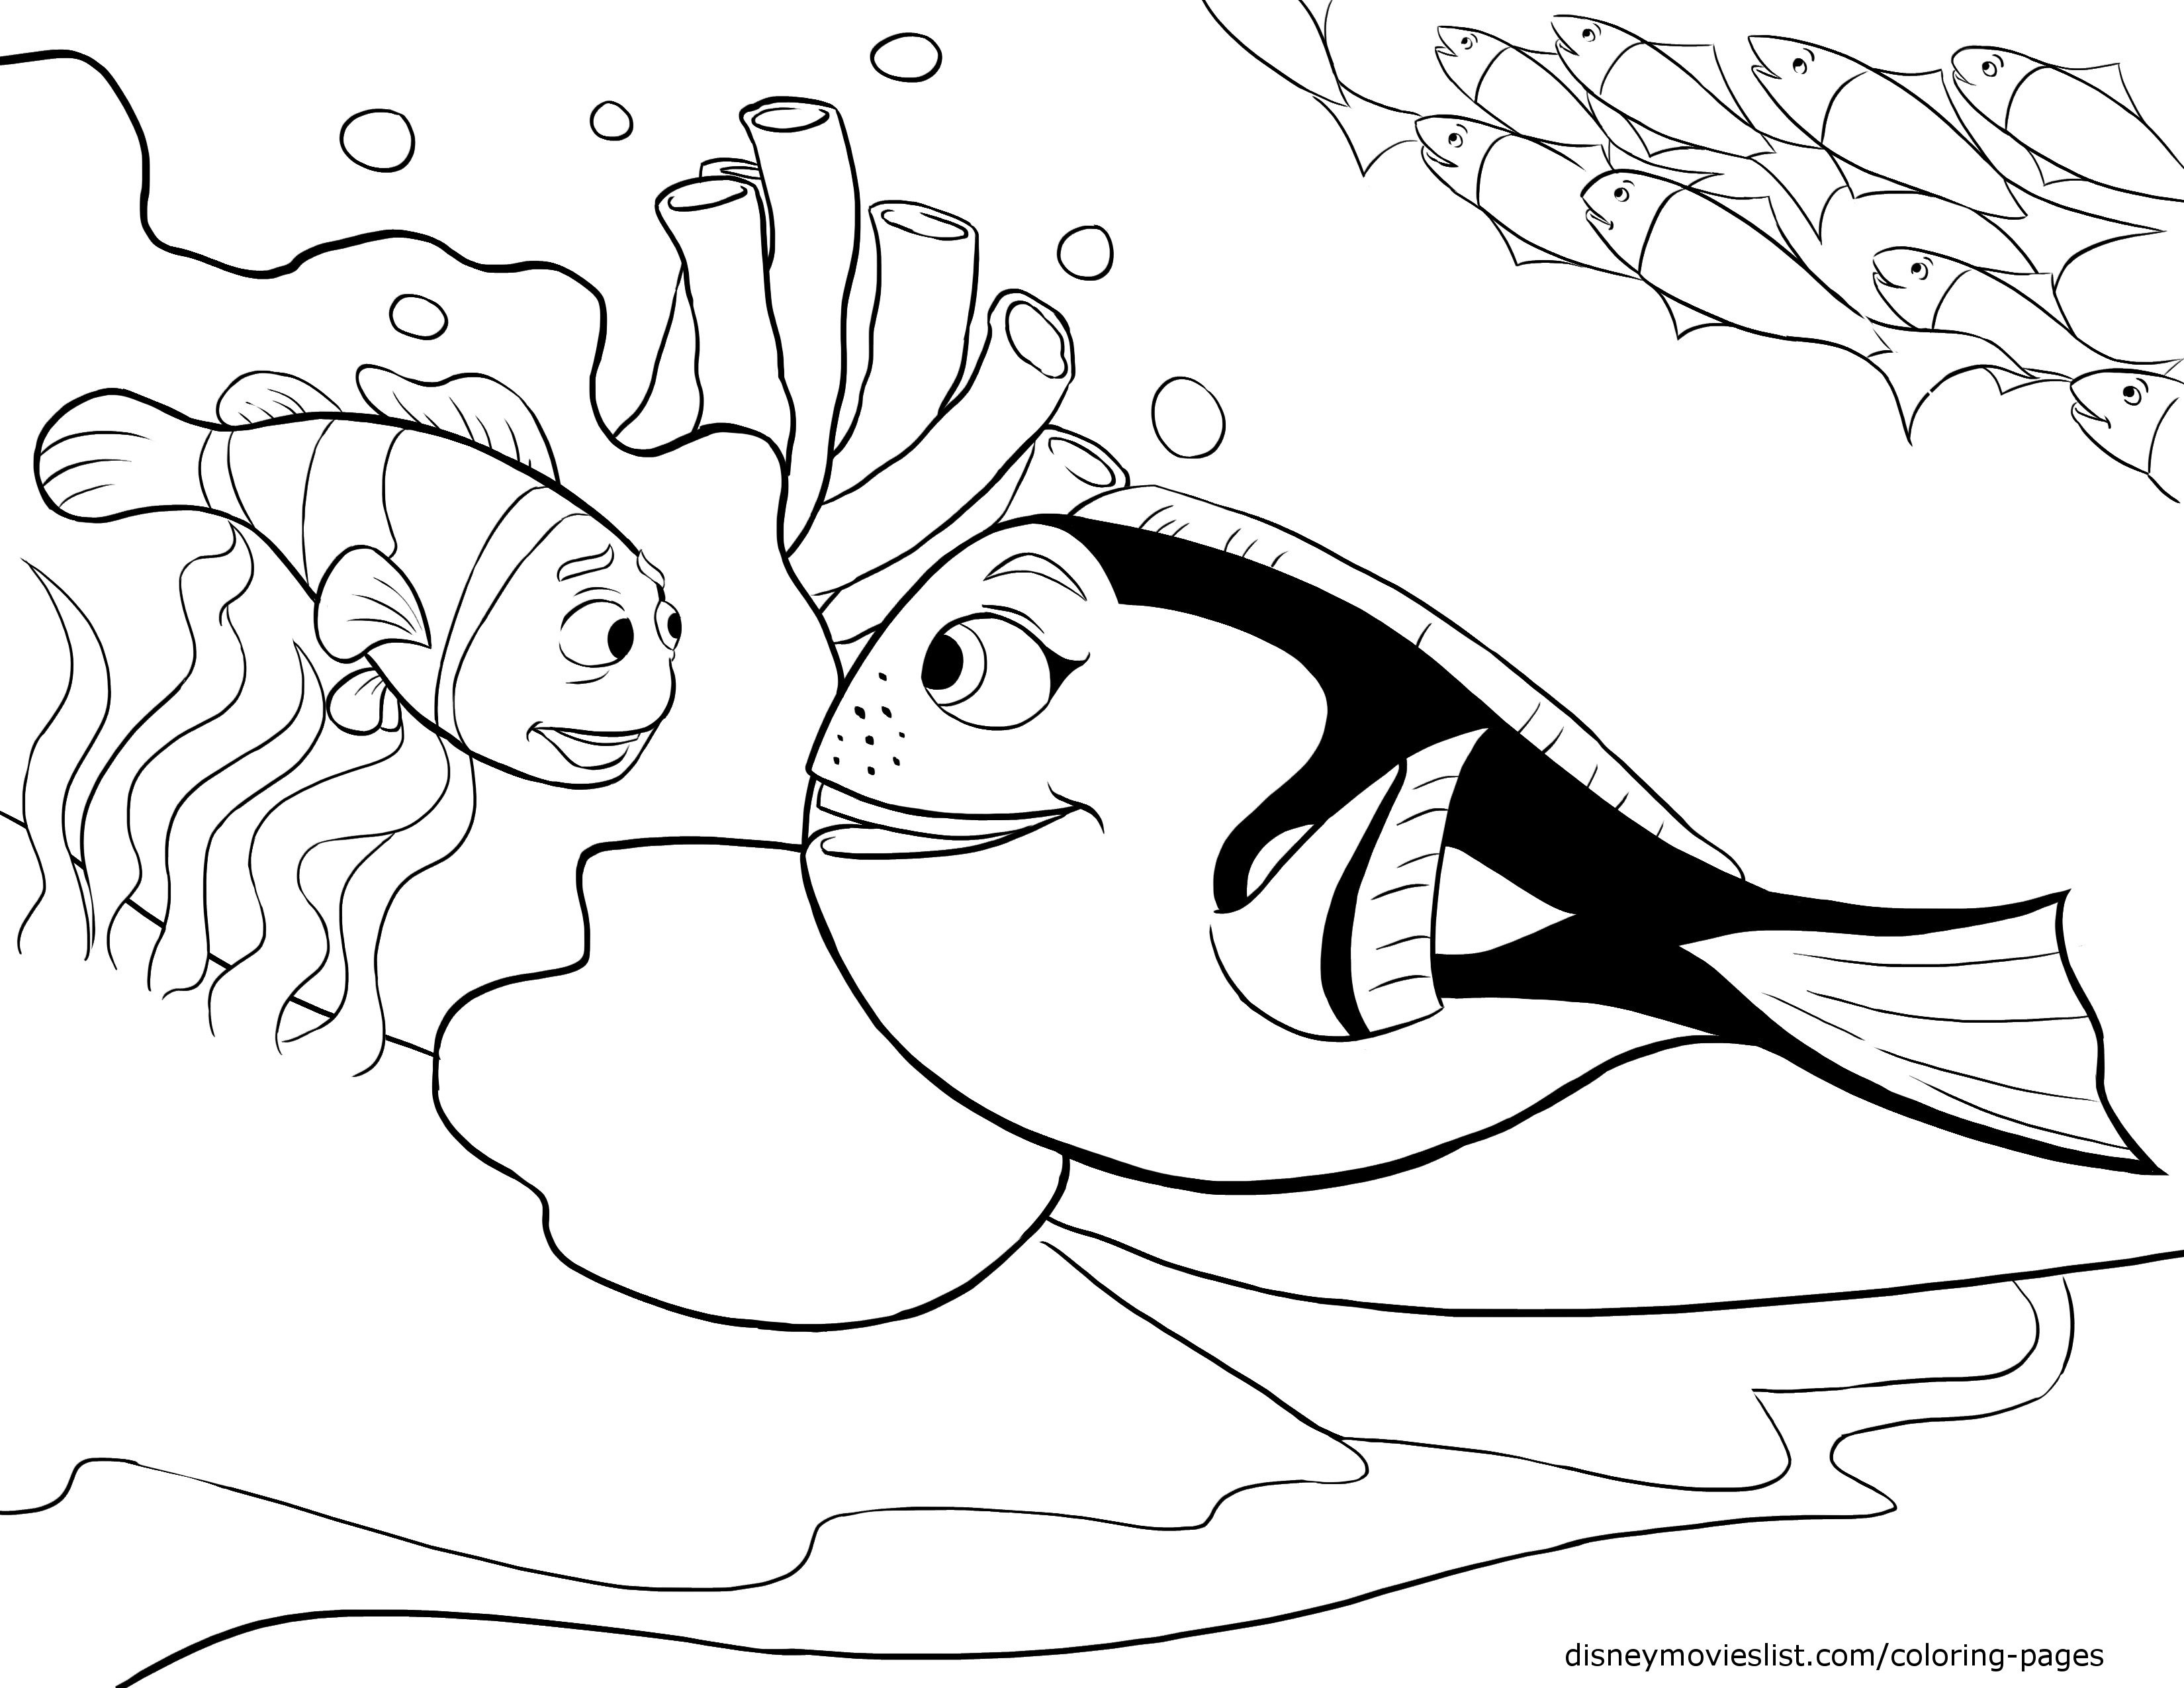 Christmas Toys Coloring Pages Coloring Pages Coloring Ideas Dory And Nemo Pages Inspirational